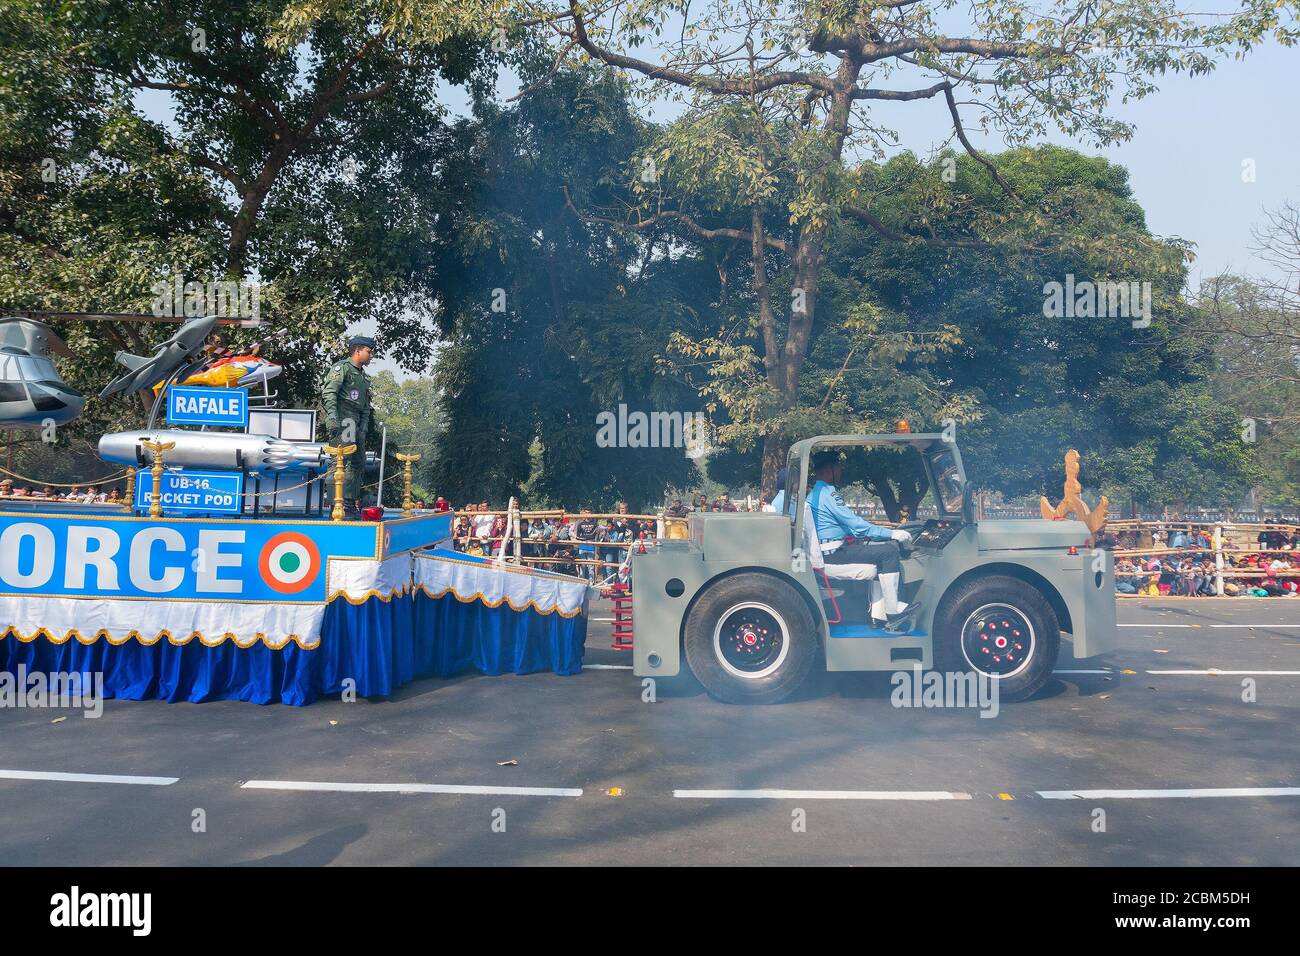 Kolkata, West Bengal, India - 26th January 2020 : Indian air force displaying model Rafale fighter jet and UB 16 rocket pod at Republic day march past. Stock Photo